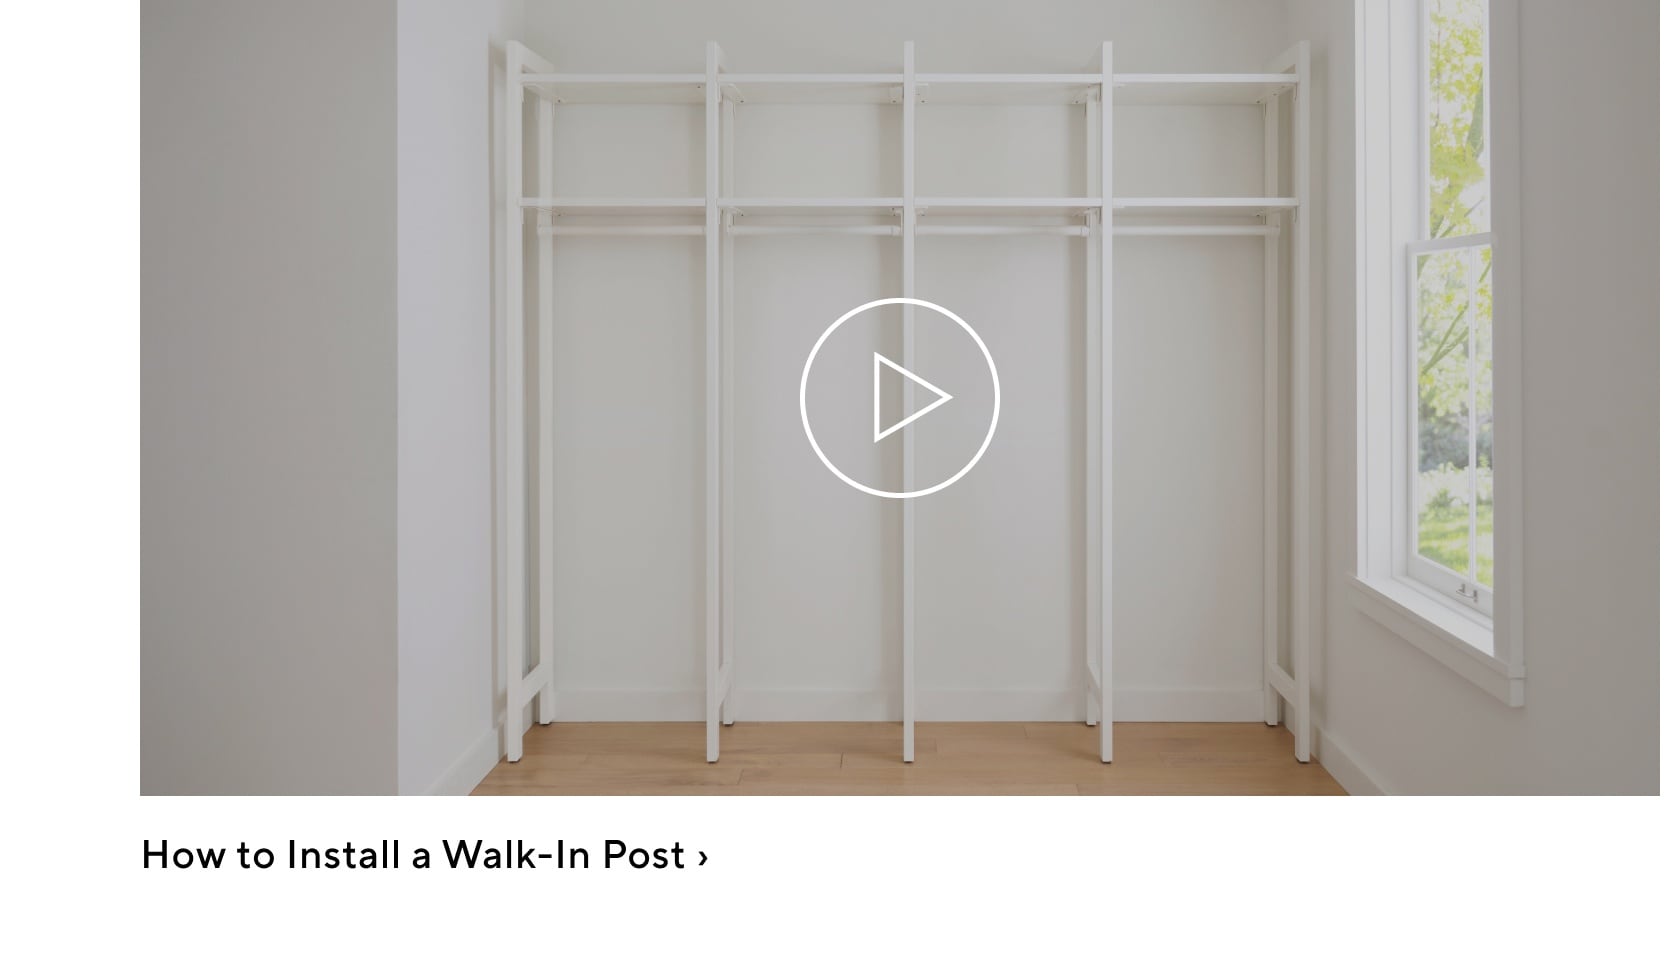 How to Install a Walk-In Post